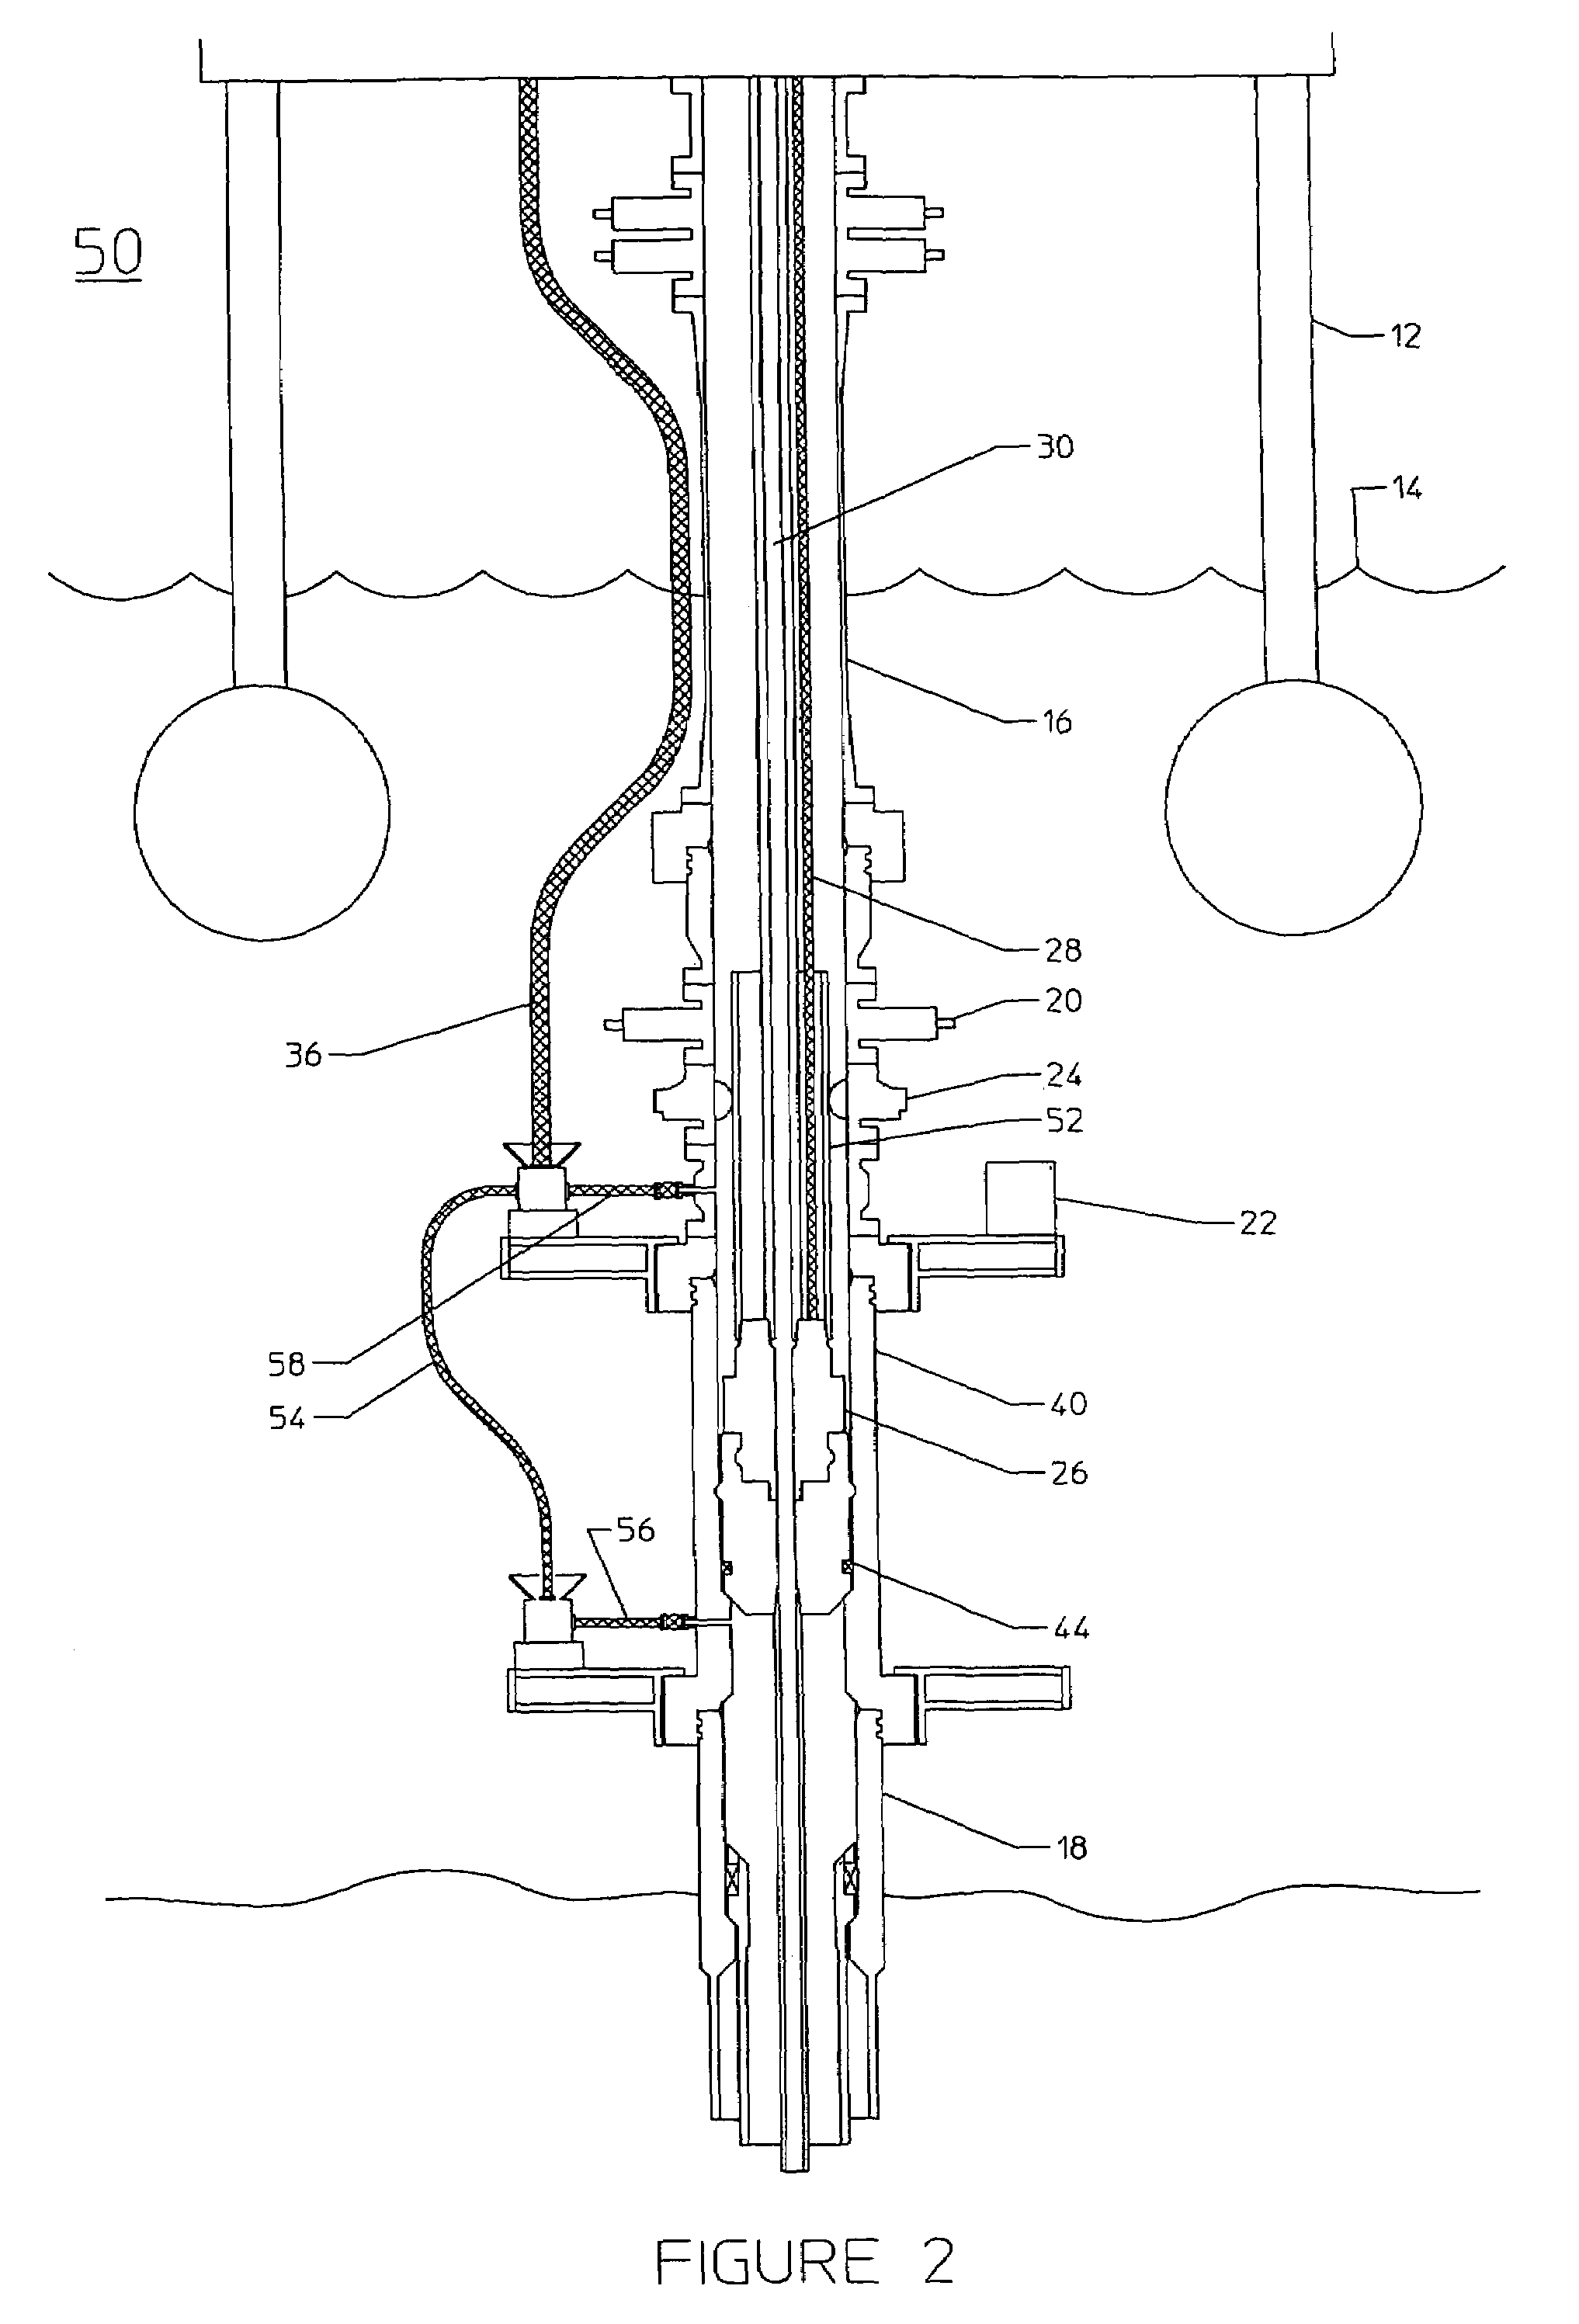 Method and apparatus for blow-out prevention in subsea drilling/completion systems